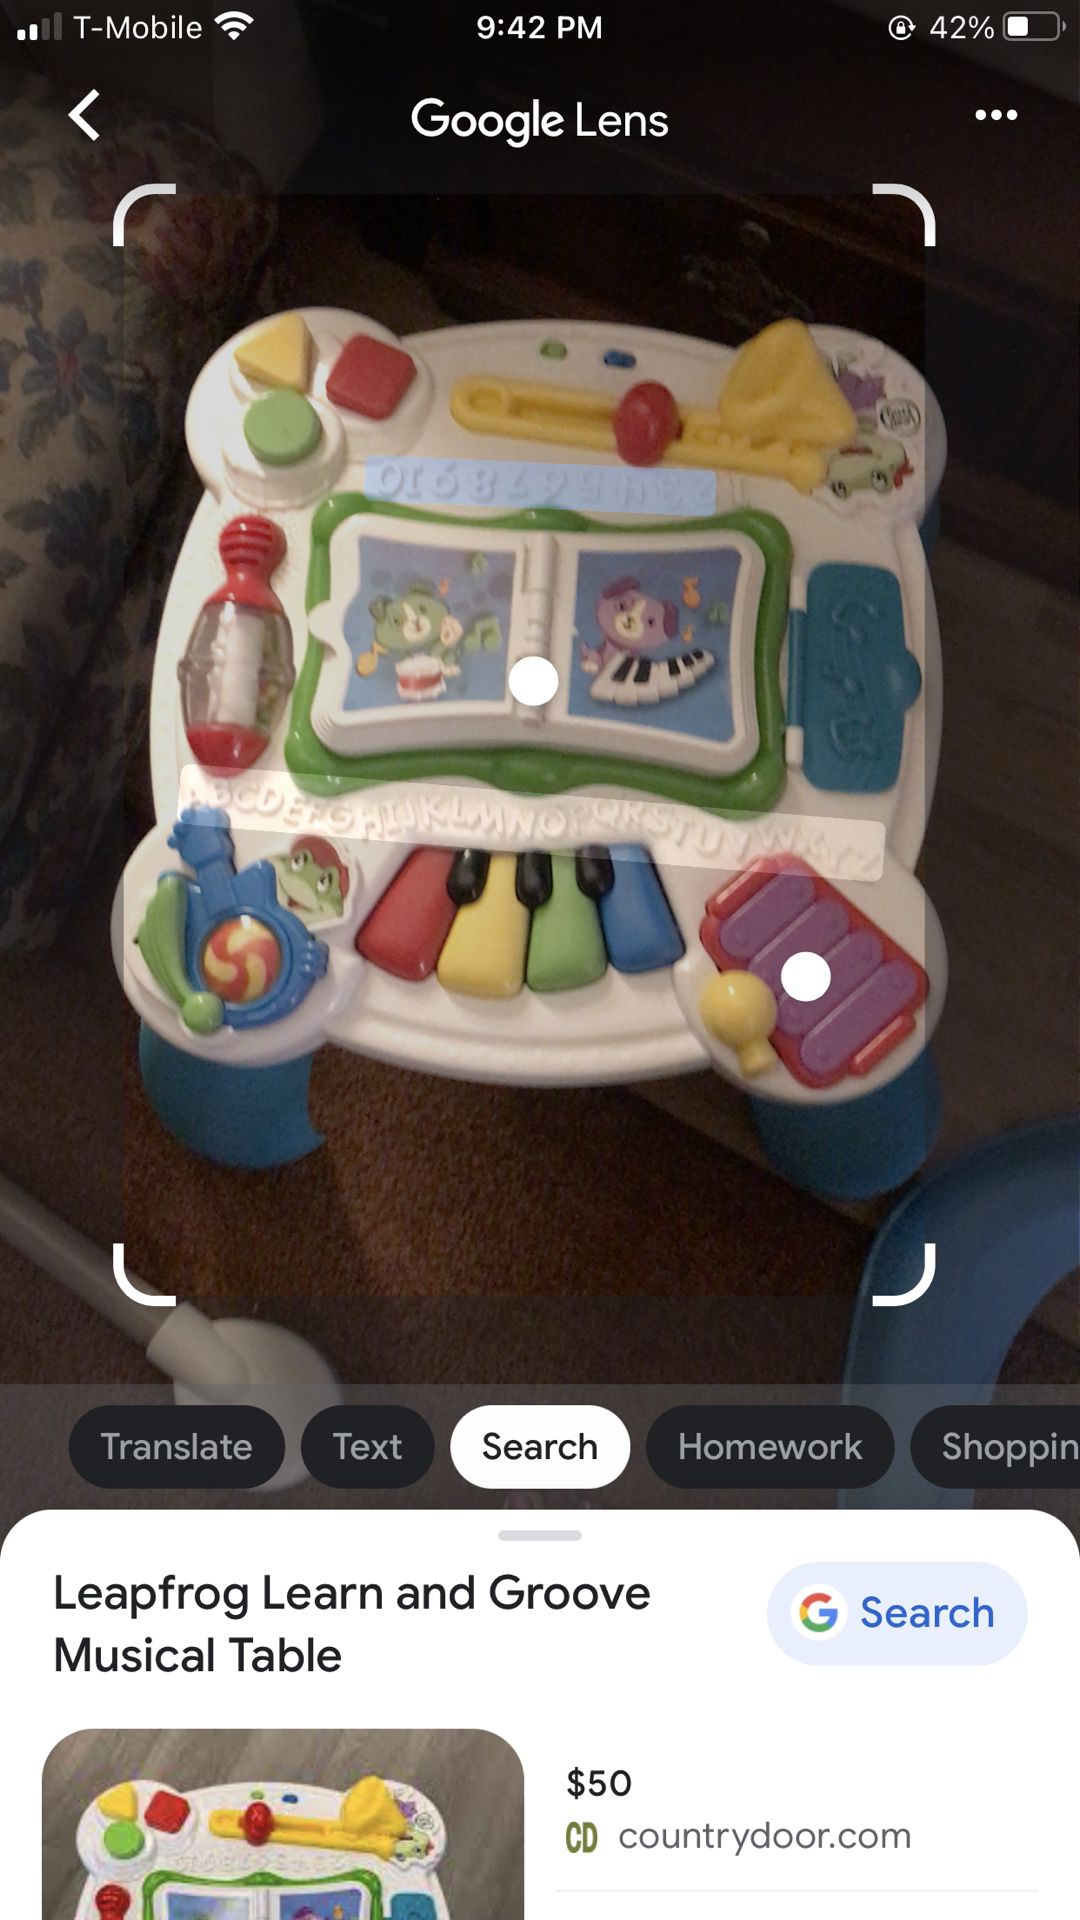 leapfrog learn and groove musical table"